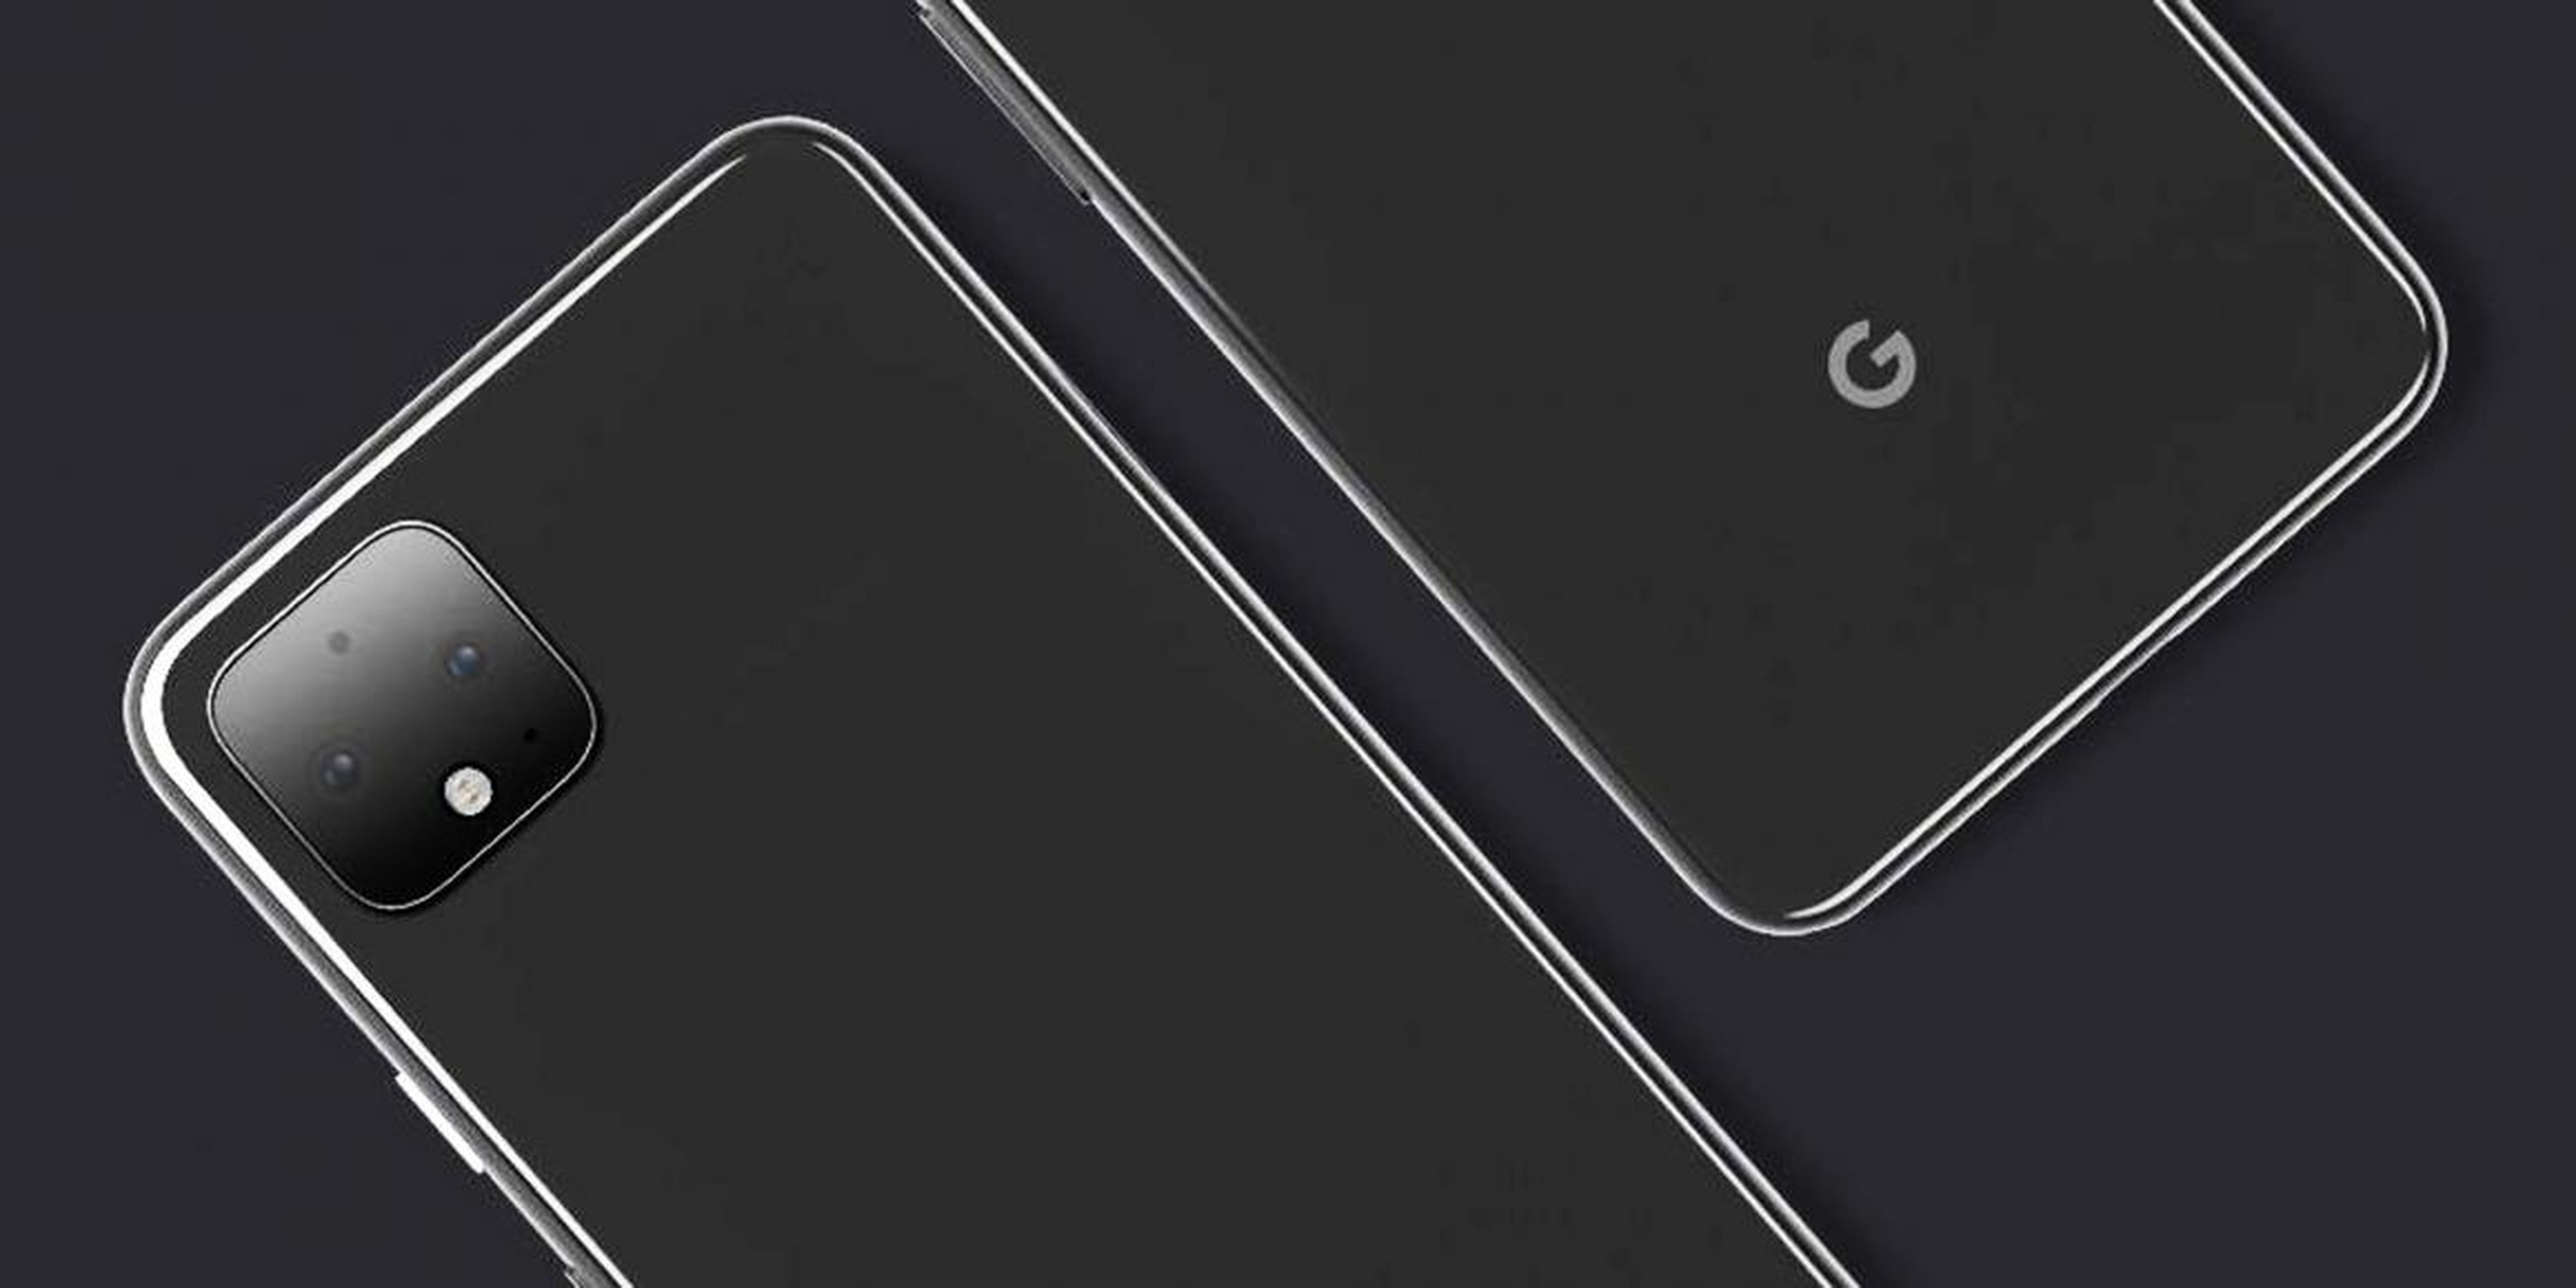 Earlier this year, Google actually did something no one expected: It released a photo of the actual Pixel 4, coming later this year. This is what it will look like.